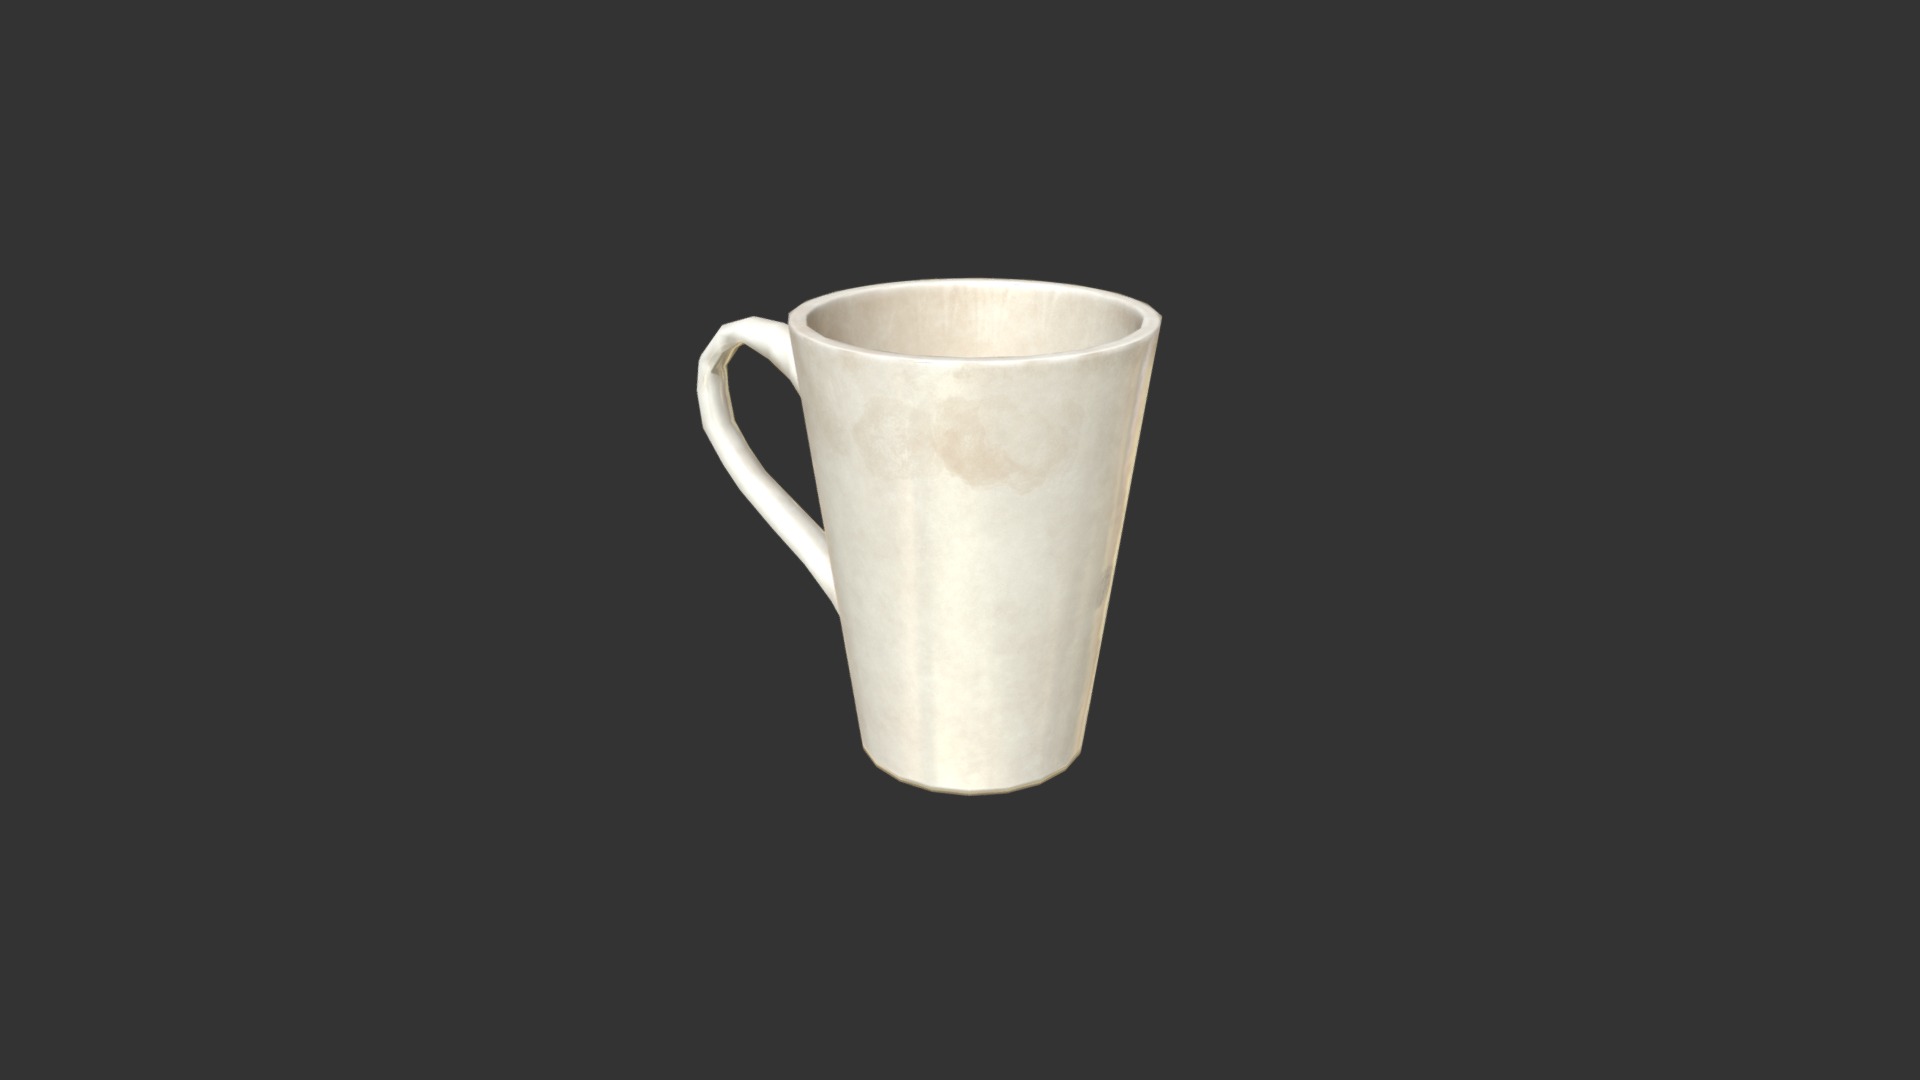 3D model used coffee mug Low-poly 3D model - This is a 3D model of the used coffee mug Low-poly 3D model. The 3D model is about a white mug on a black background.